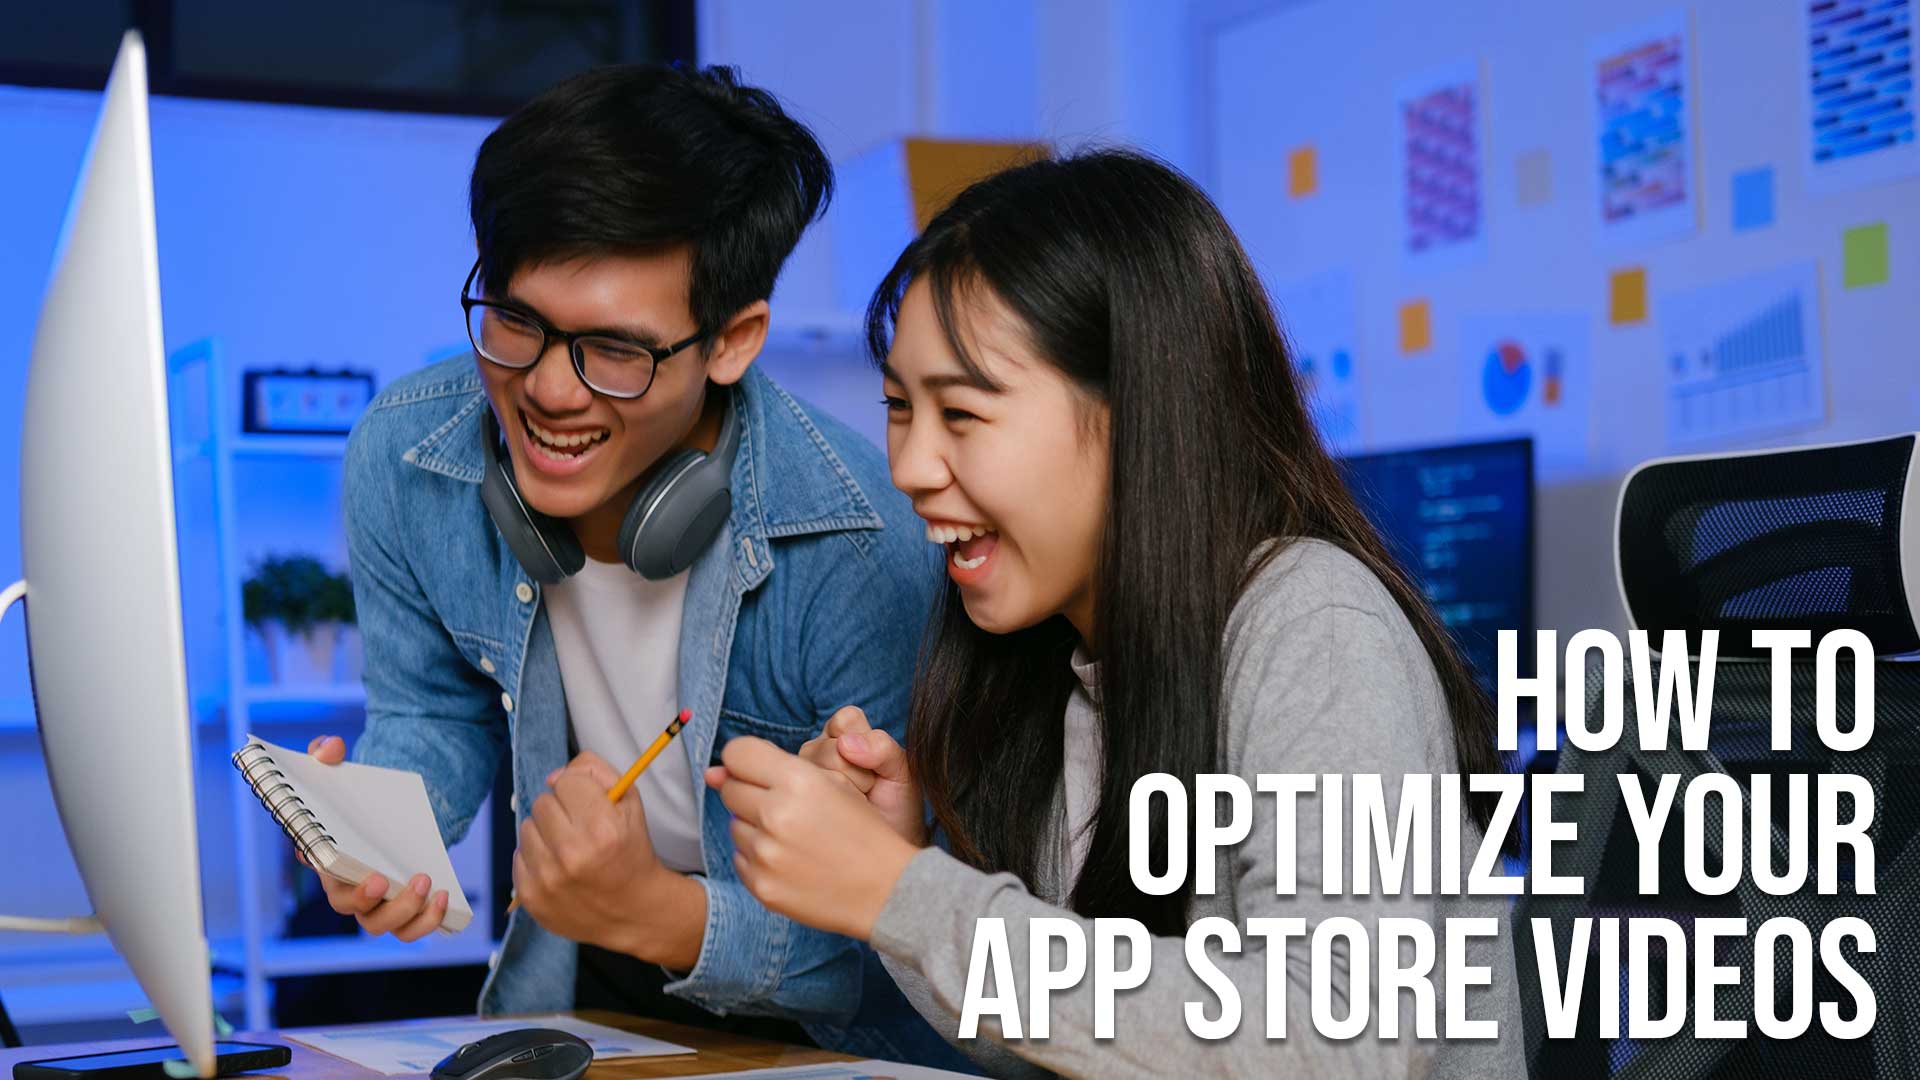 How to Optimize Your App Store Videos